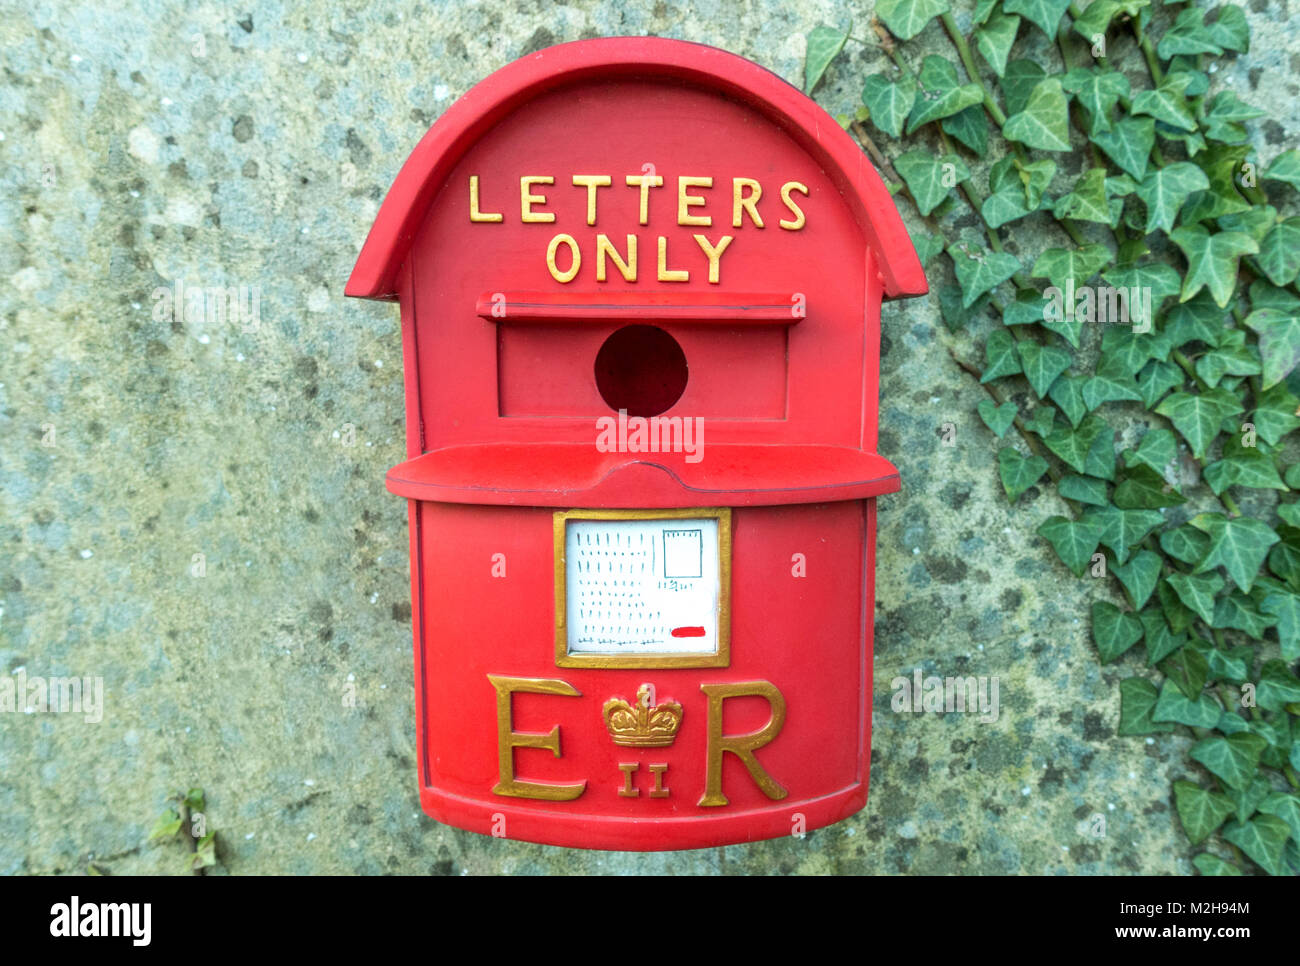 Novelty red bird box for nesting / breeding, hanging on a garden wall, resembling a British postbox, with Royal Mail Crown emblem, and 'letters only'. Stock Photo